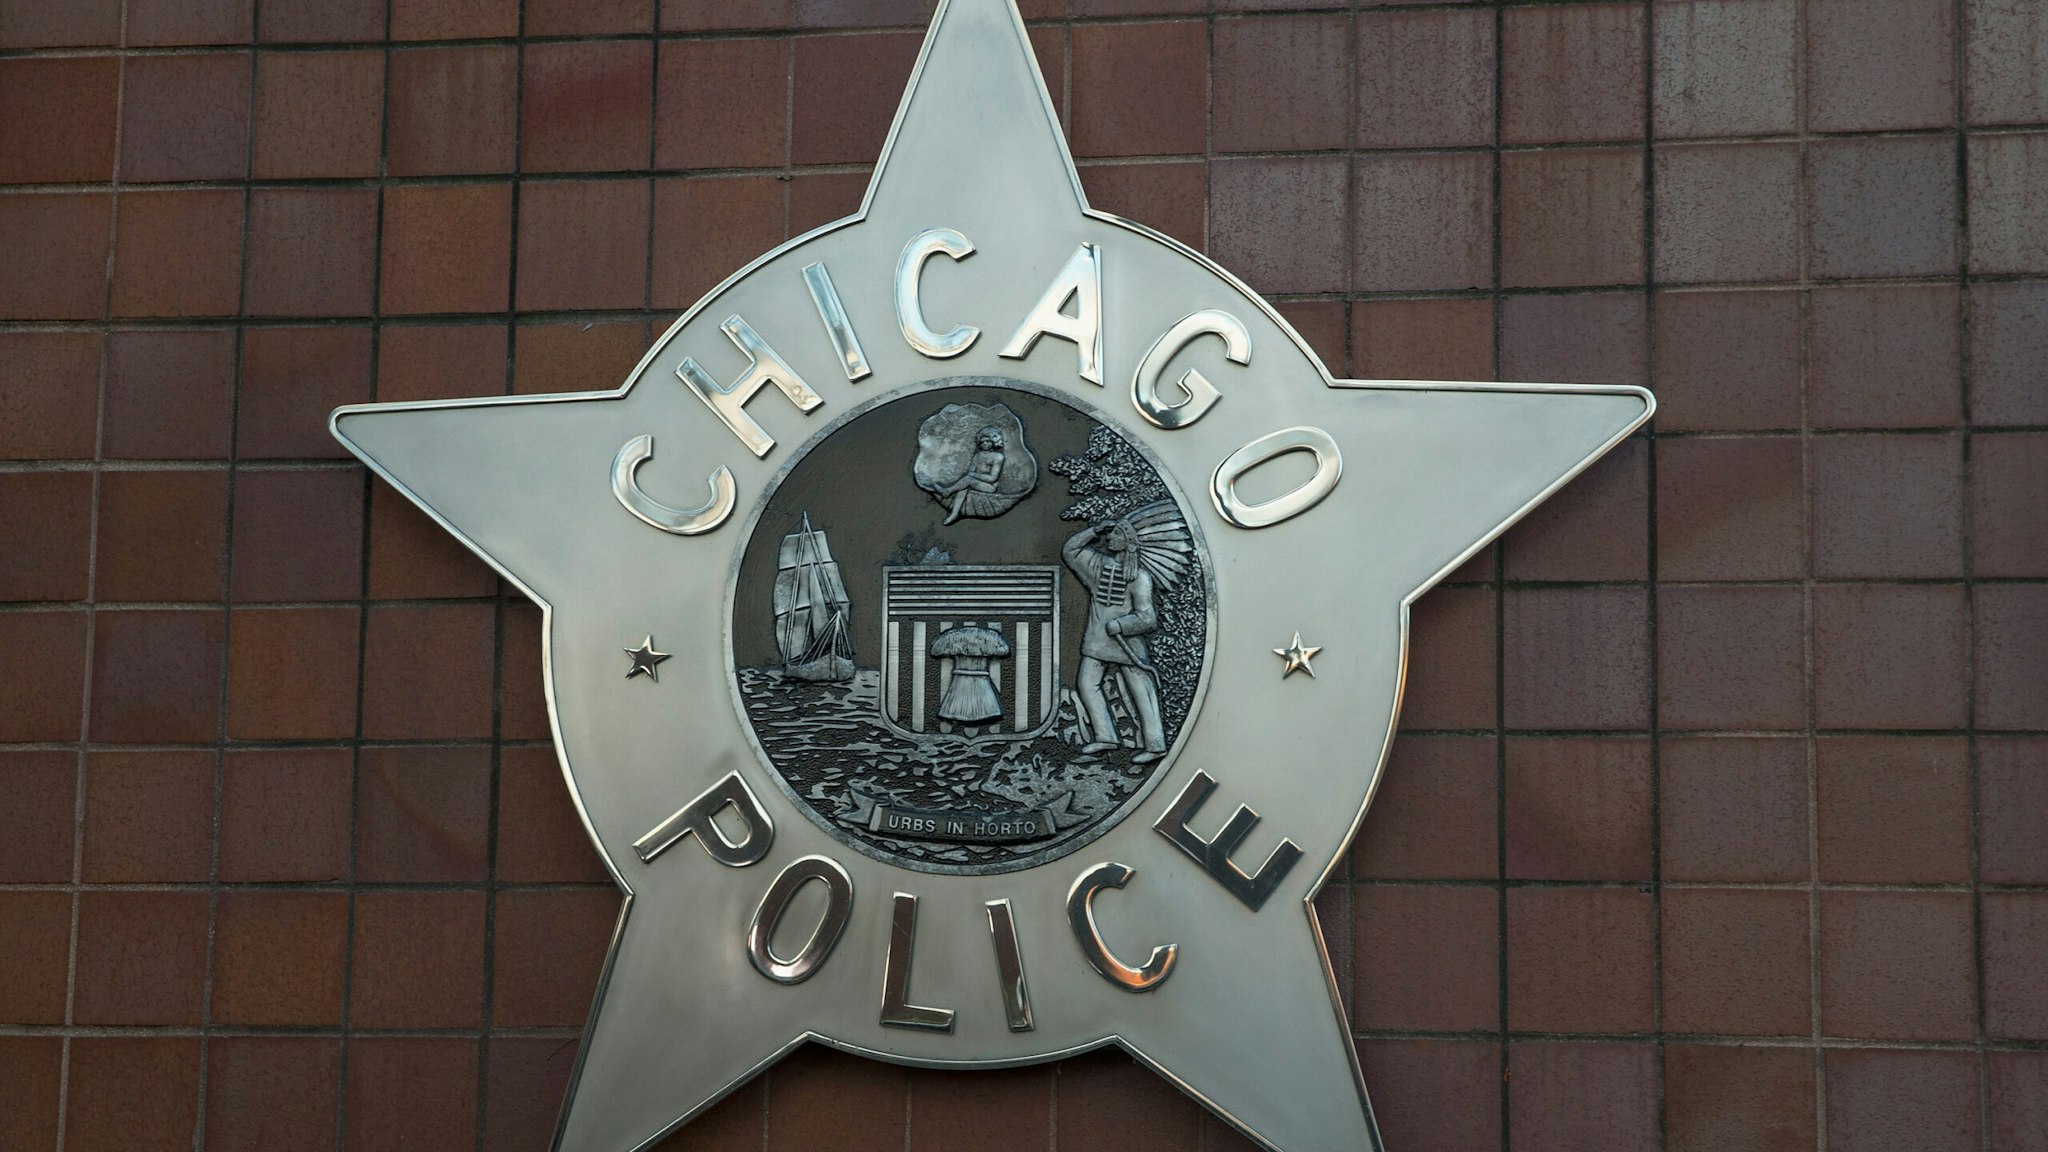 CHICAGO, IL - DECEMBER 01: A Chicago police badge hangs in front of the City of Chicago Public Safety Headquarters on December 1, 2015 in Chicago, Illinois. Following public outcry over the way police handled the shooting death of Laquan McDonald by Chicago police officer Jason Van Dyke, Mayor Rahm Emanuel today announced he had fired Chicago Police Superintendant Garry McCarthy. McCarthy, Emanuel and Cook County States Attorney Anita Alvarez have been accused of trying to cover up the shooting. (Photo by Scott Olson/Getty Images)